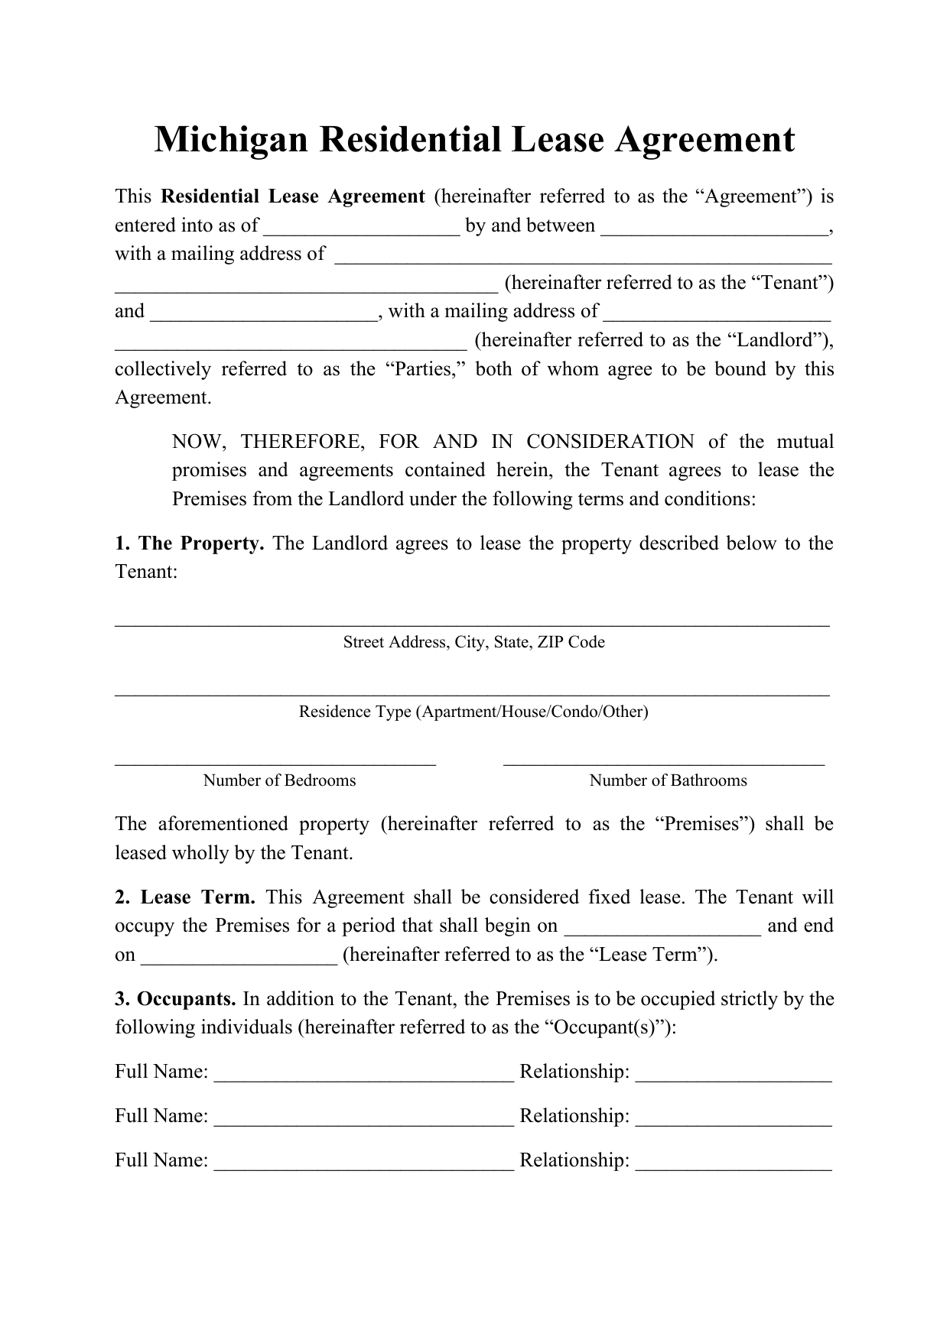 Residential Lease Agreement Template - Michigan, Page 1